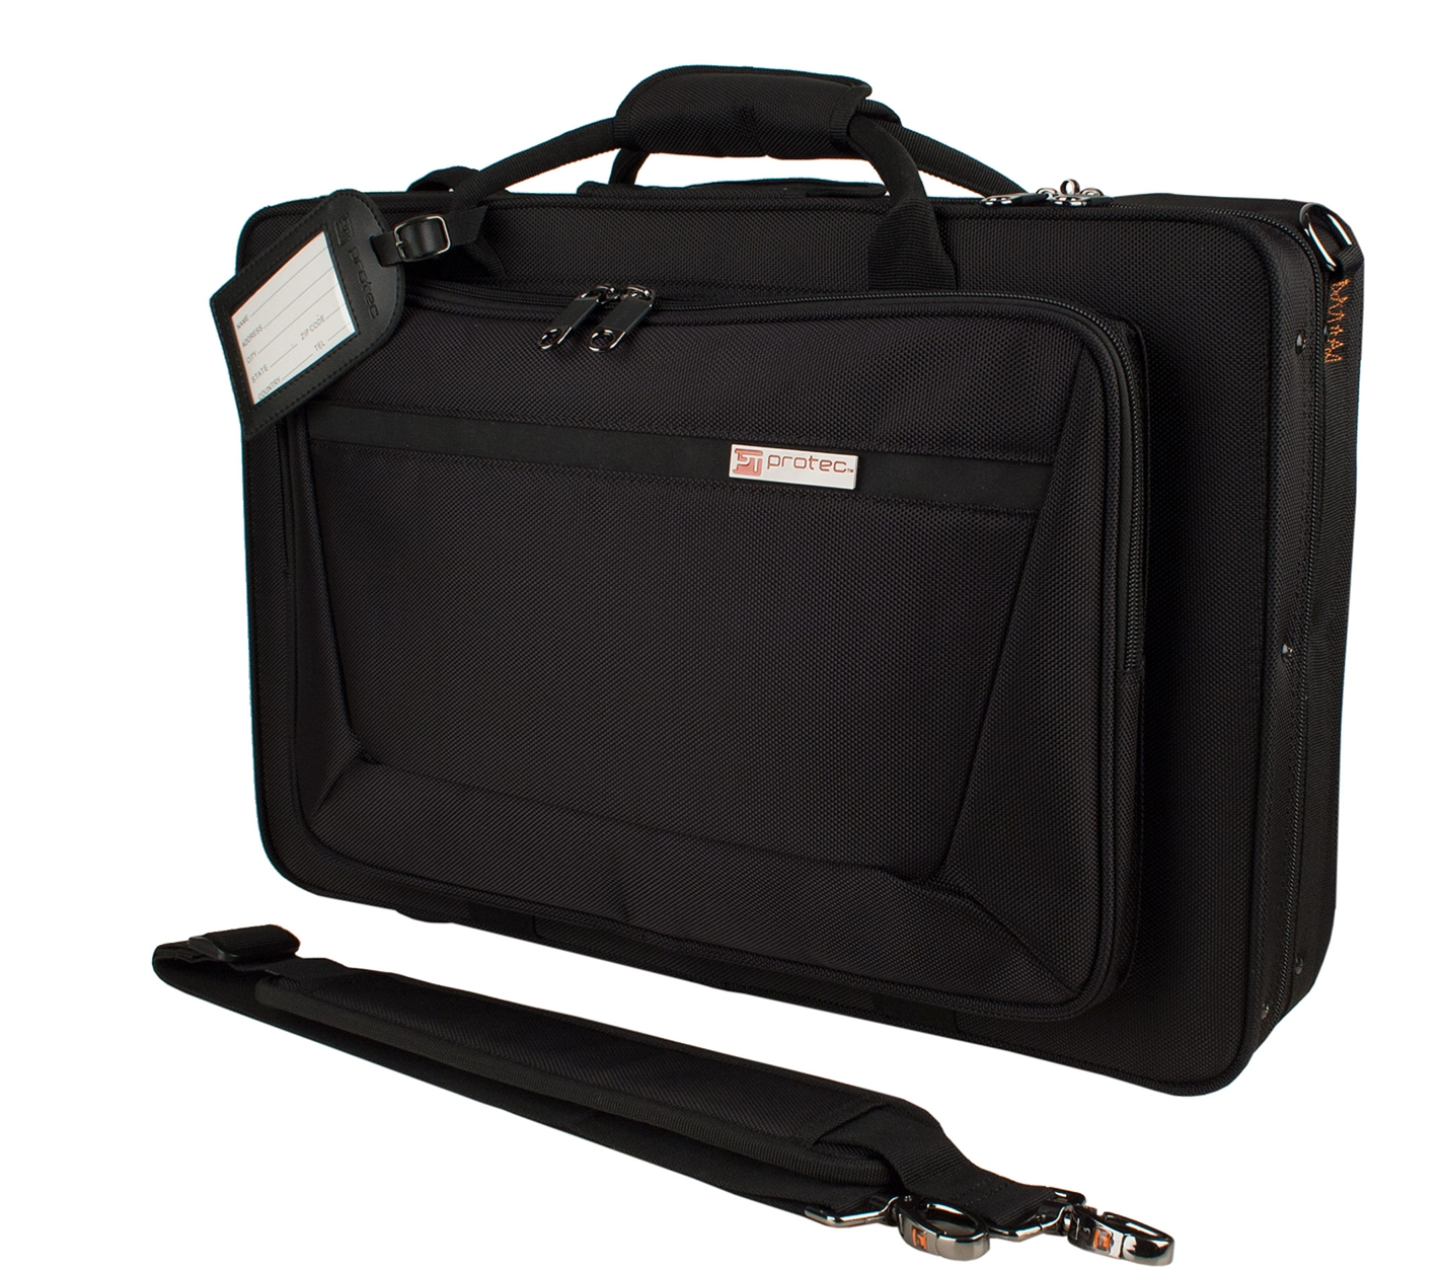 Protec Pro Pac Oboe/English Horn Case